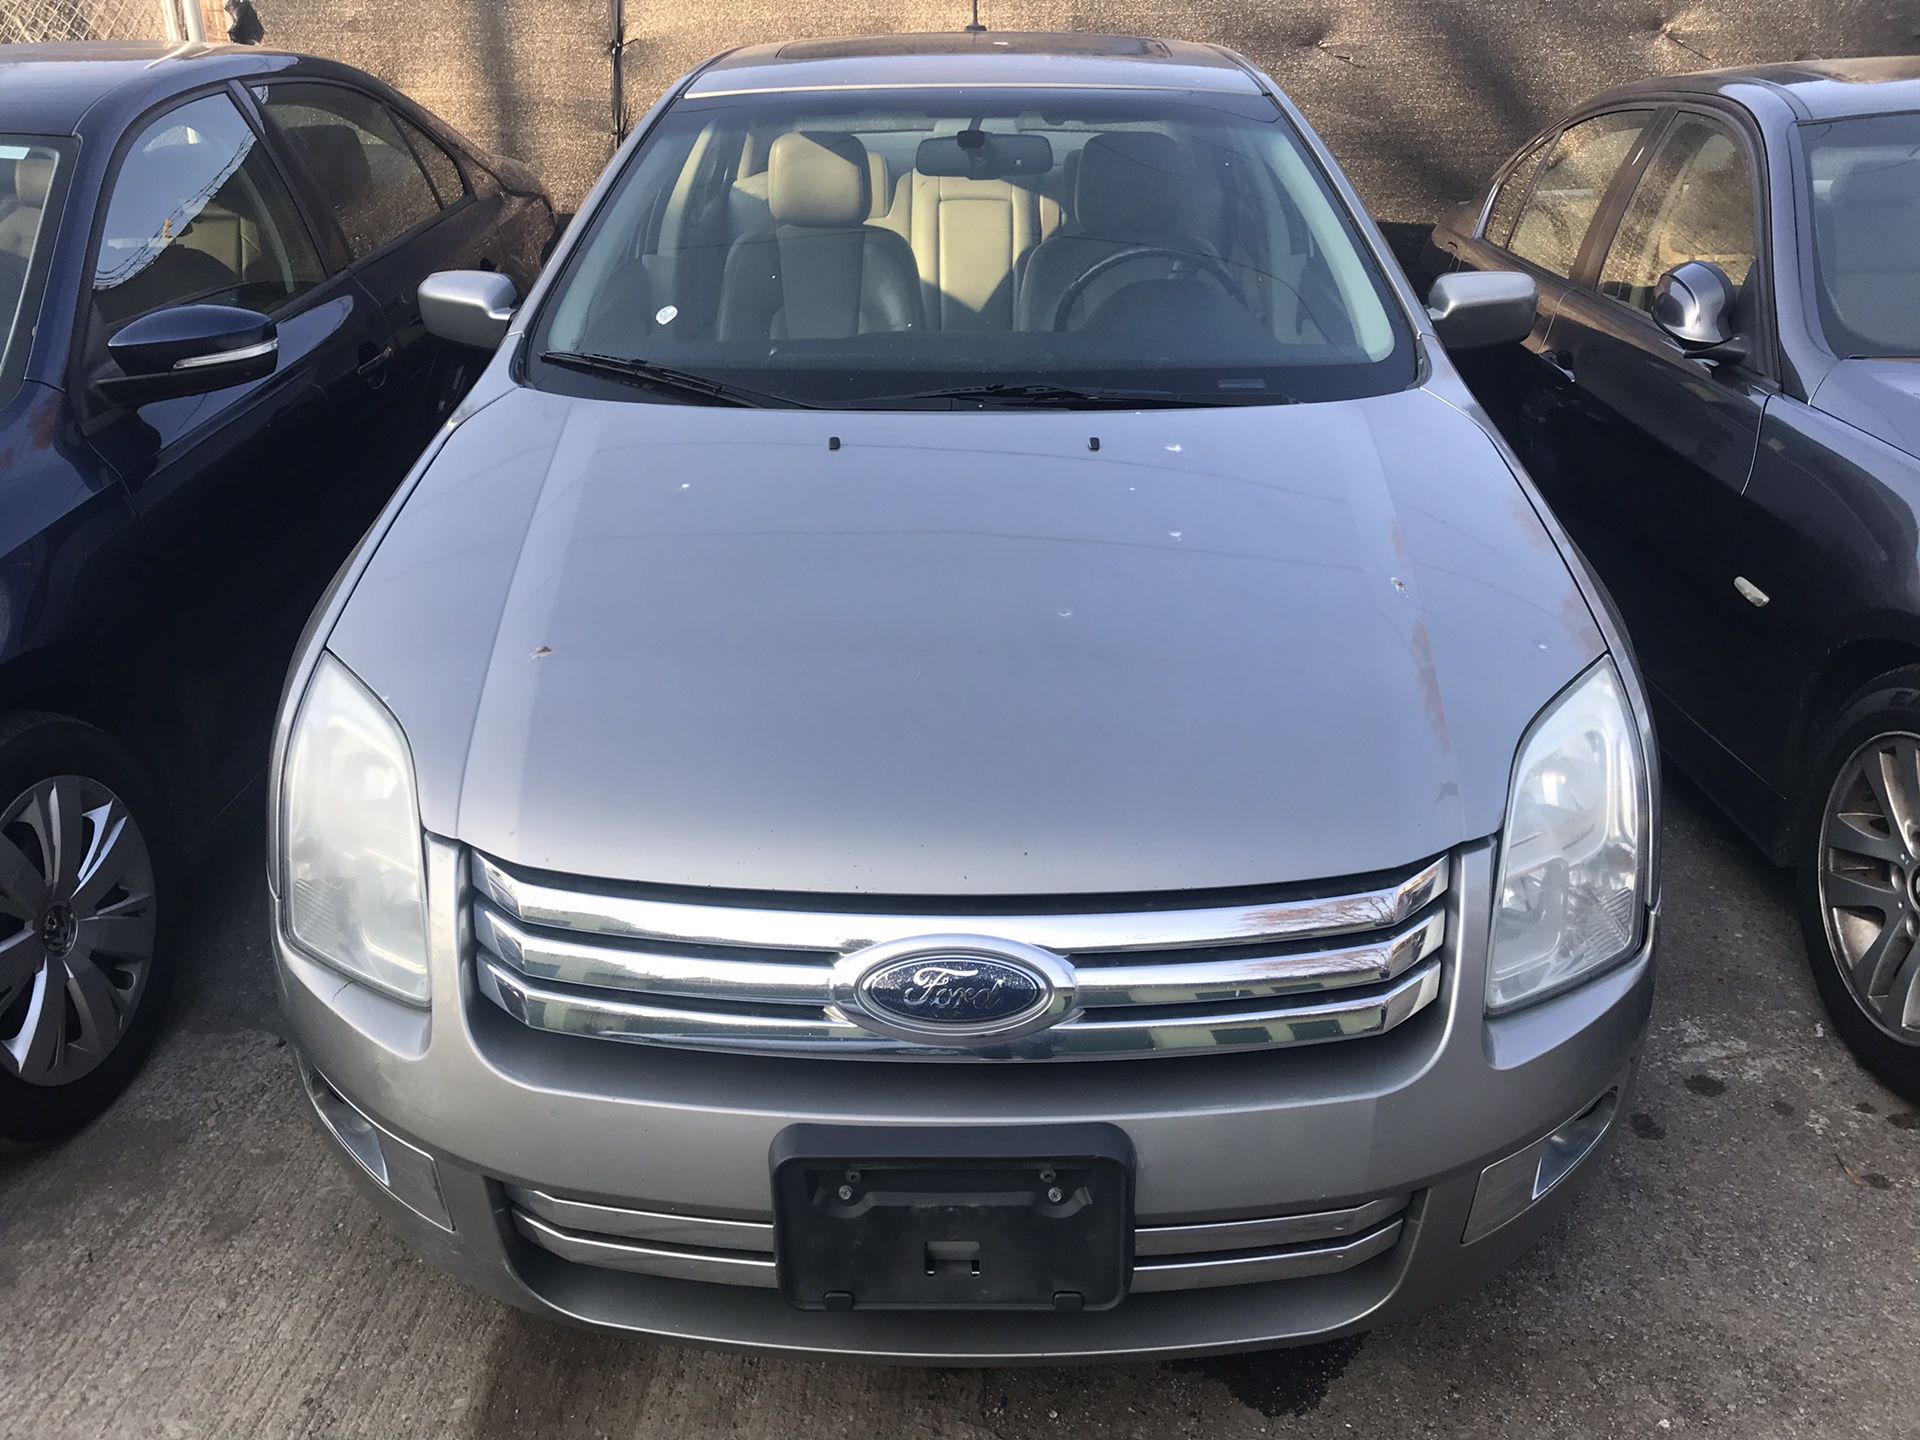 2009 Ford FUSION, RUNS EXCELLENT